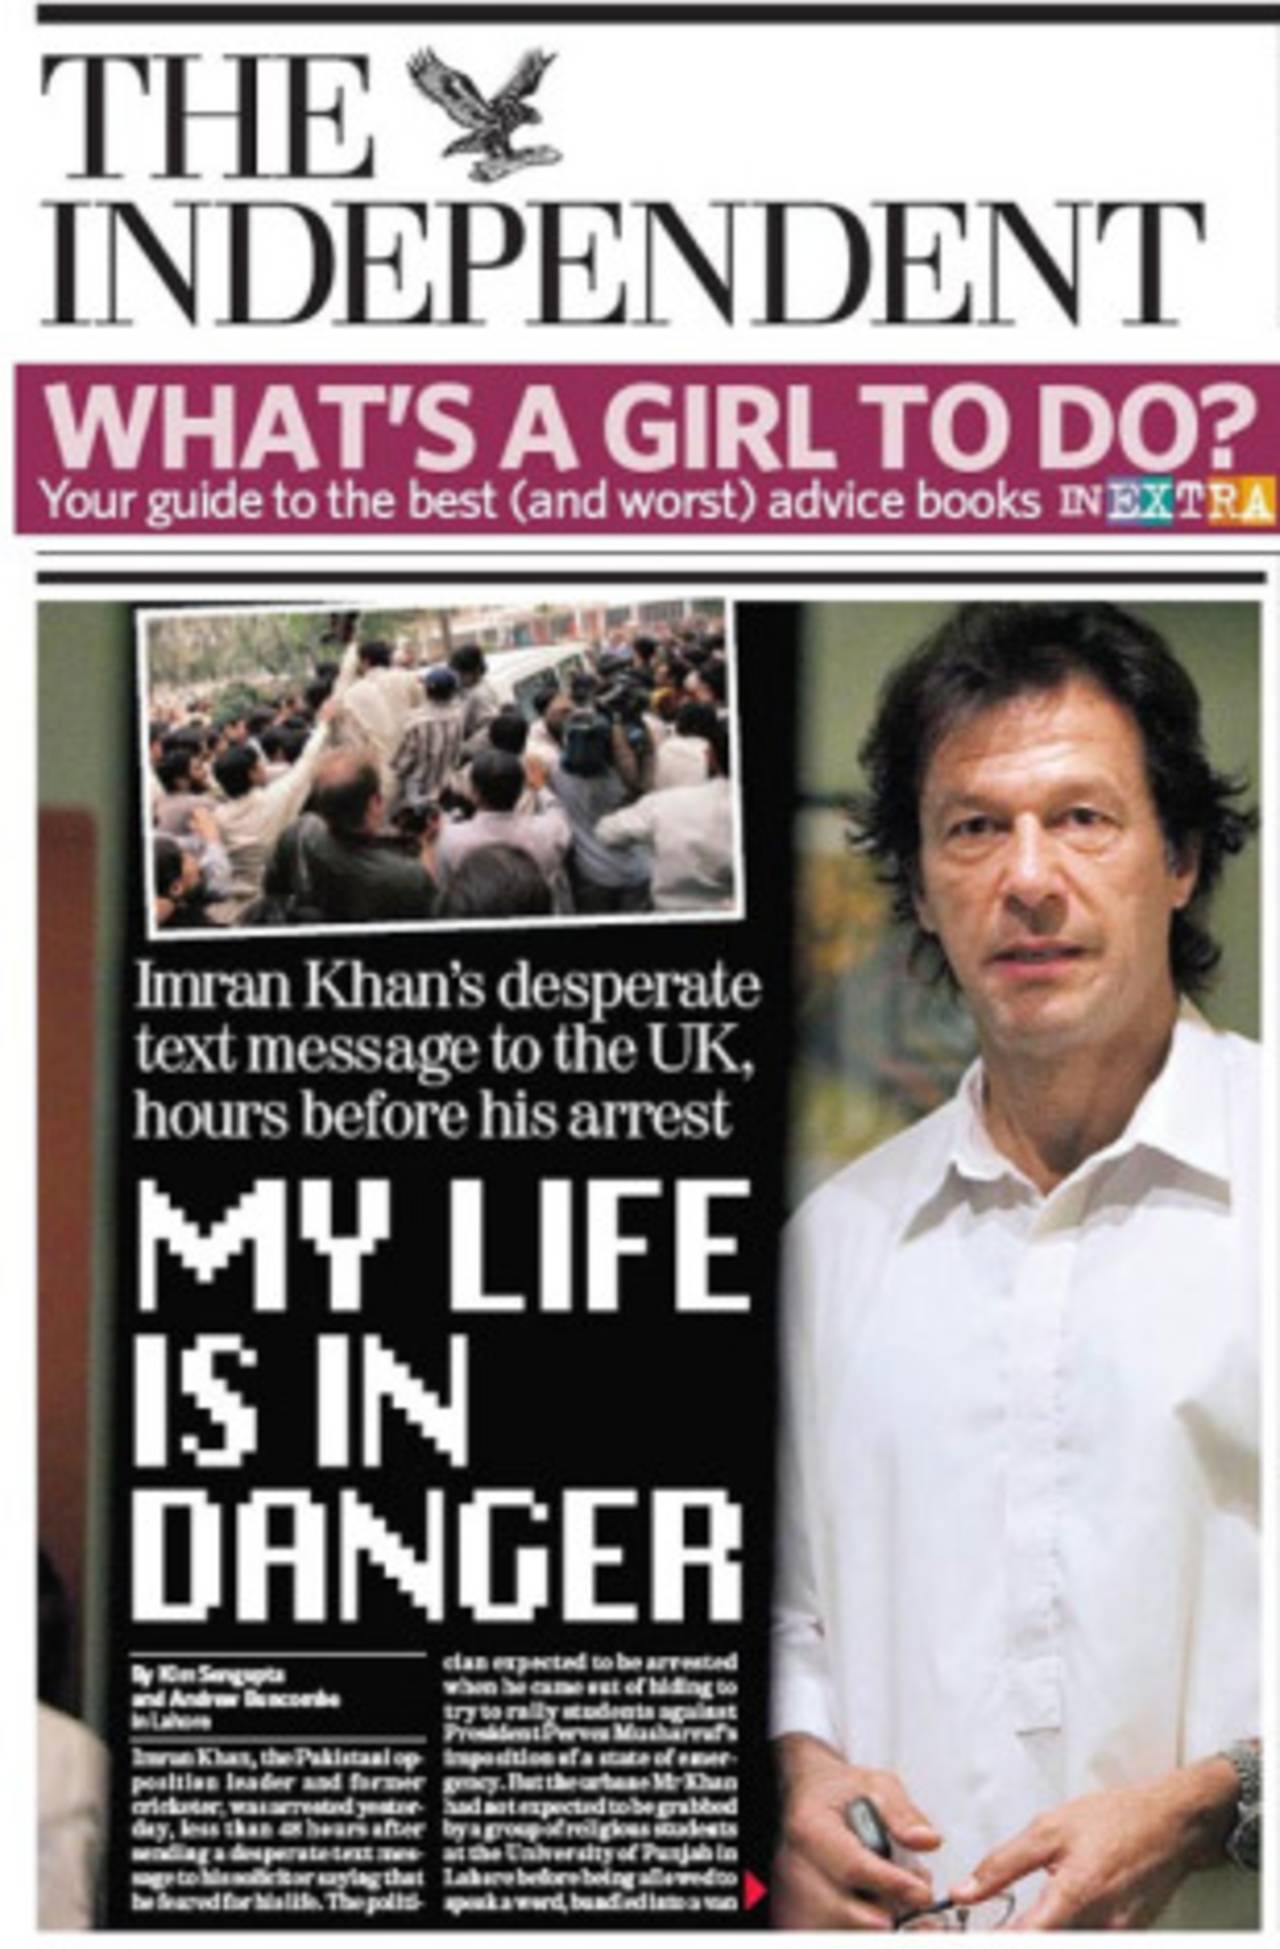 The front page of <I>The Independent</I> following Imran Khan's arrest, November 15, 2007